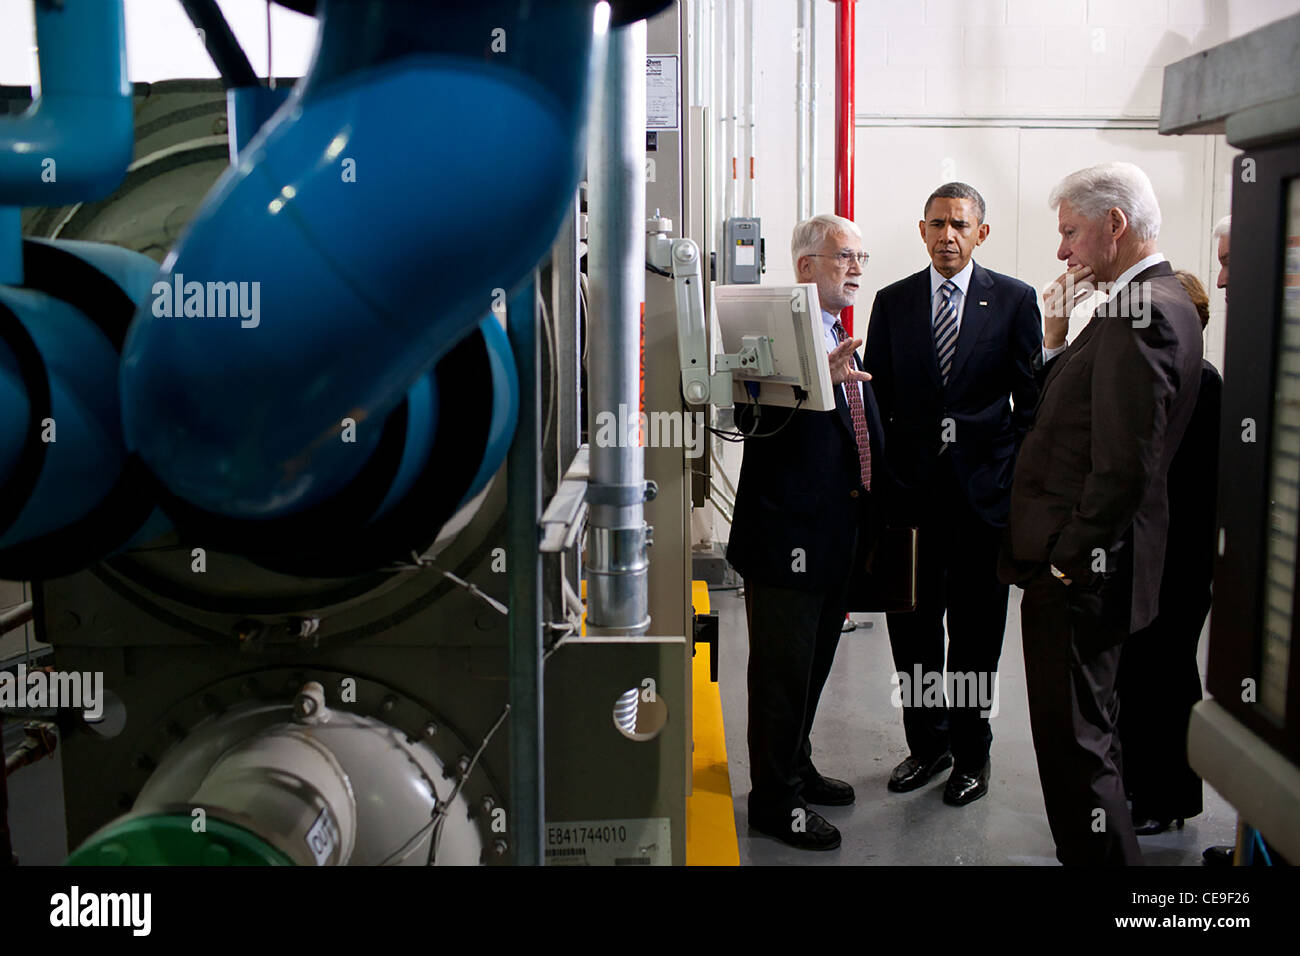 President Barack Obama and former President Bill Clinton listen as Gary Le Francois, Senior Vice President and Director of Engineering, leads them on a tour of the Trans-Western Building December 2, 2011 in Washington, DC. Stock Photo